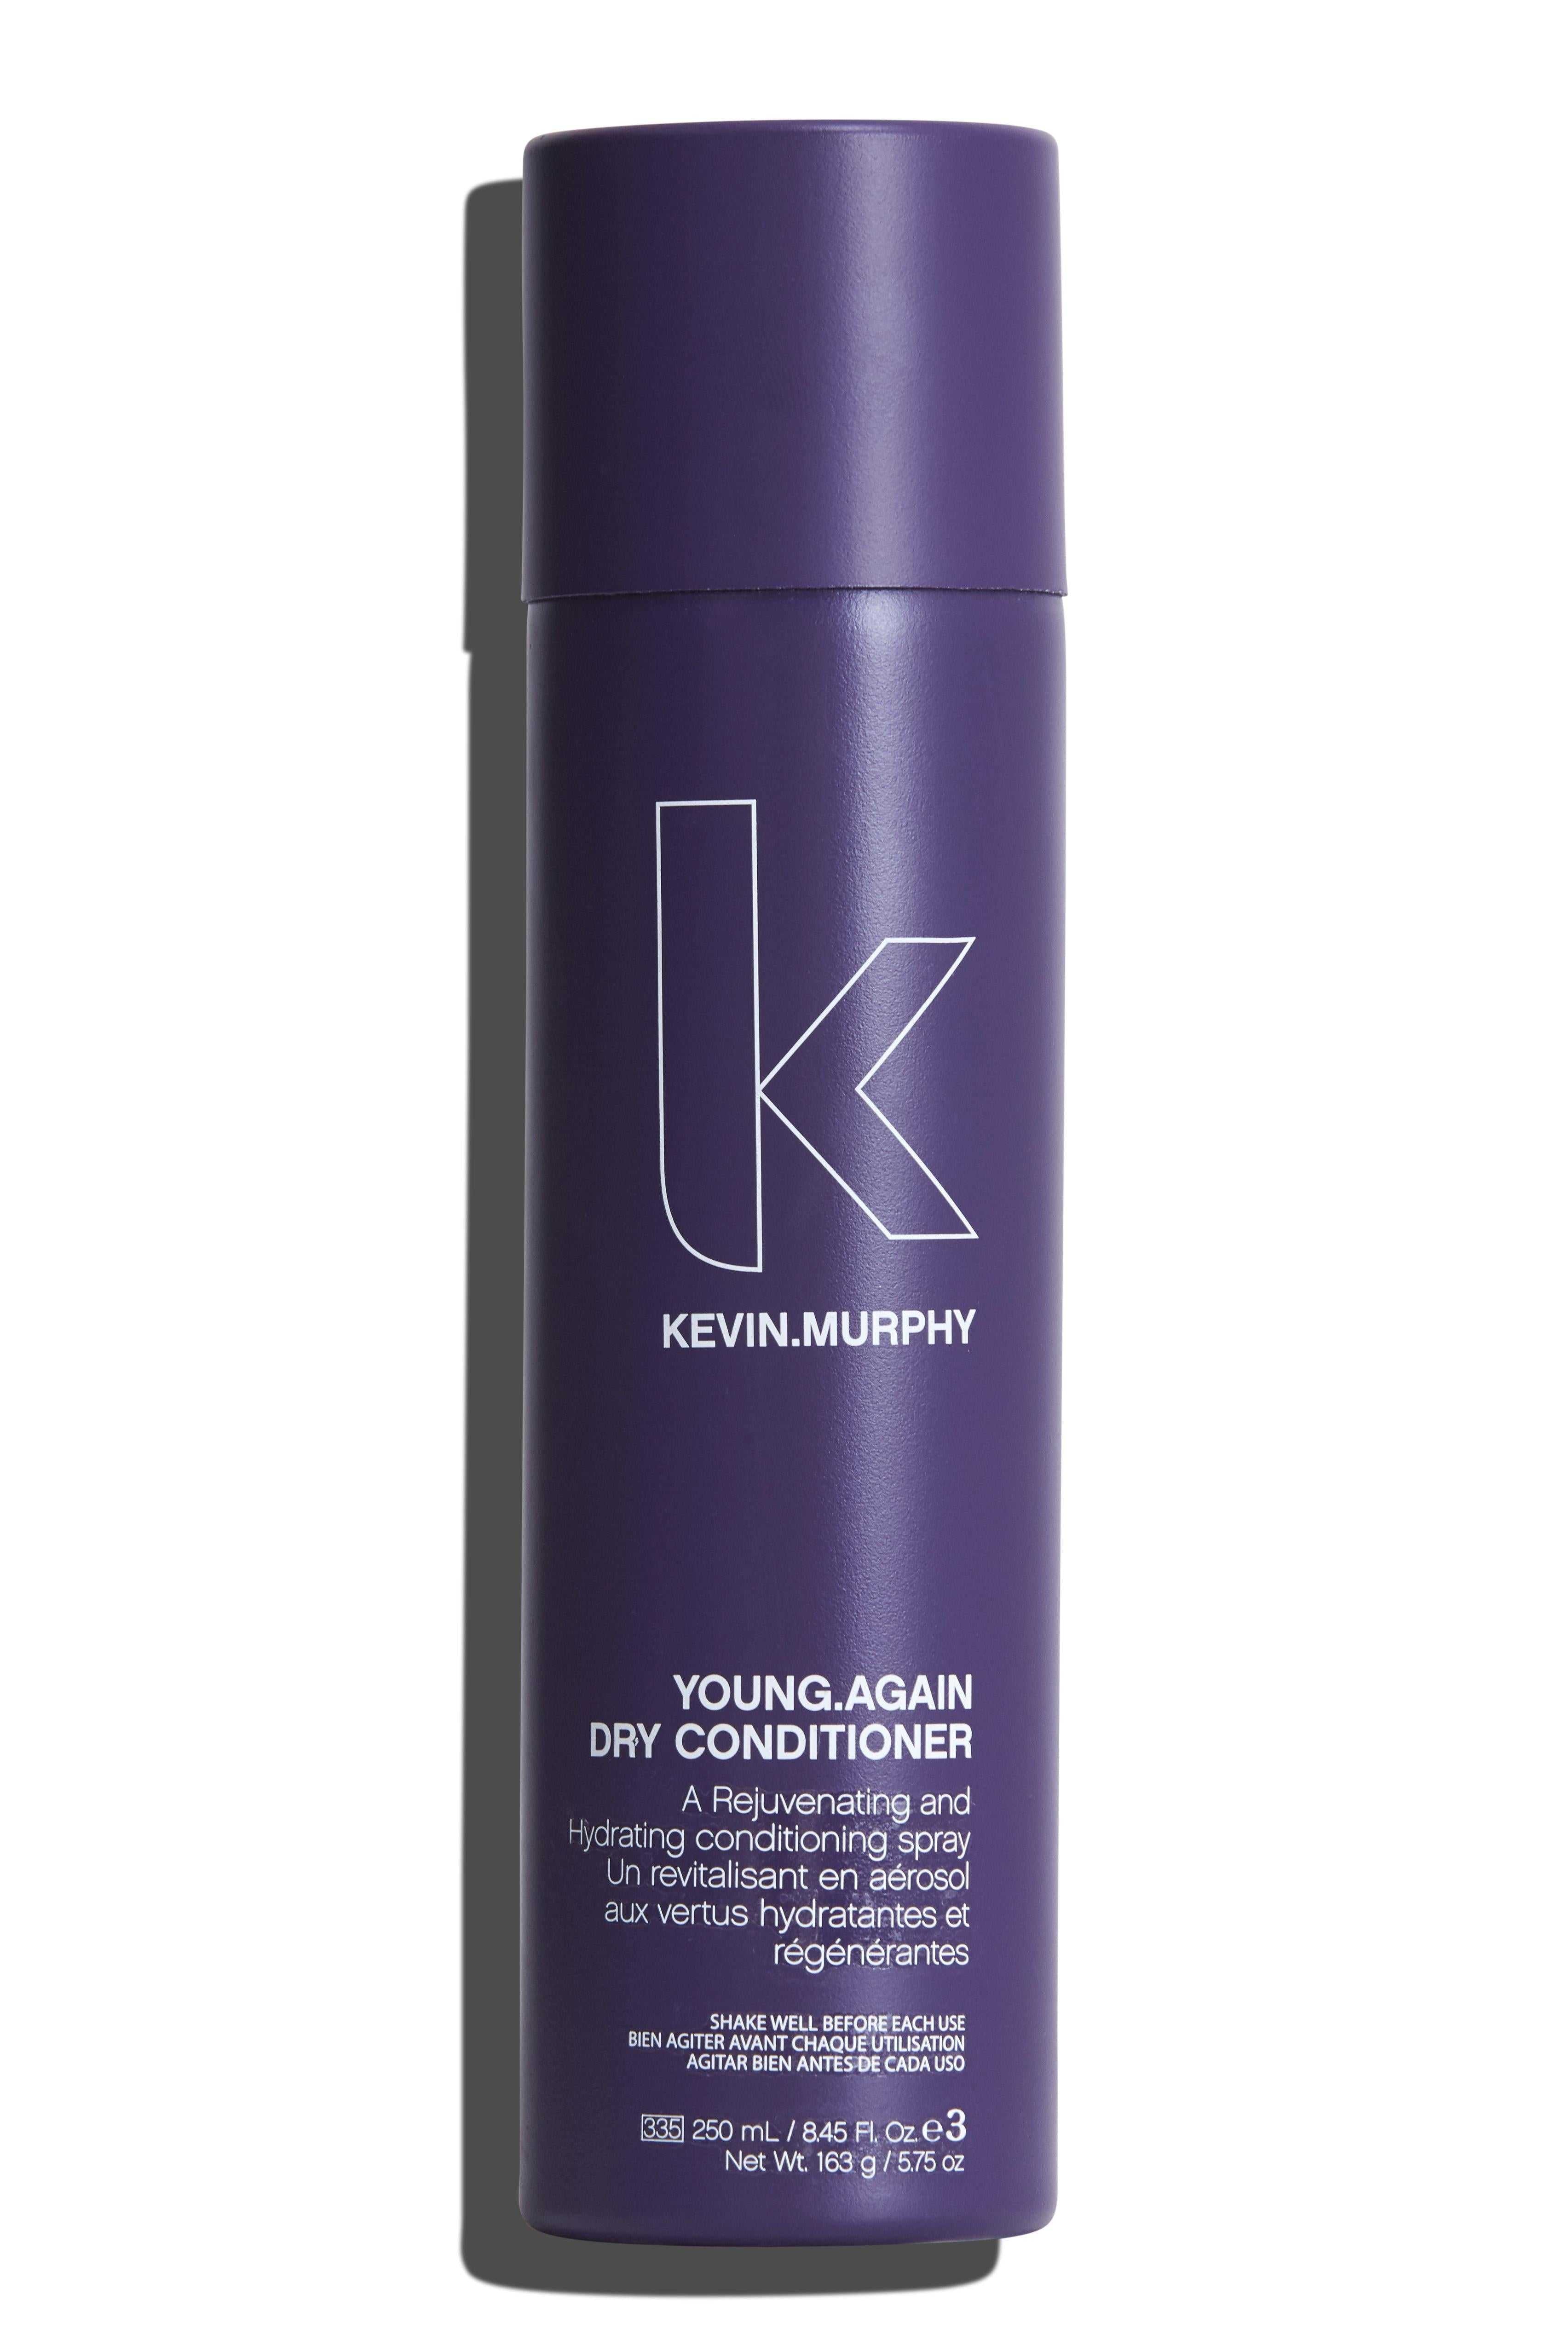 YOUNG.AGAIN DRY CONDITIONER Kevin Murphy